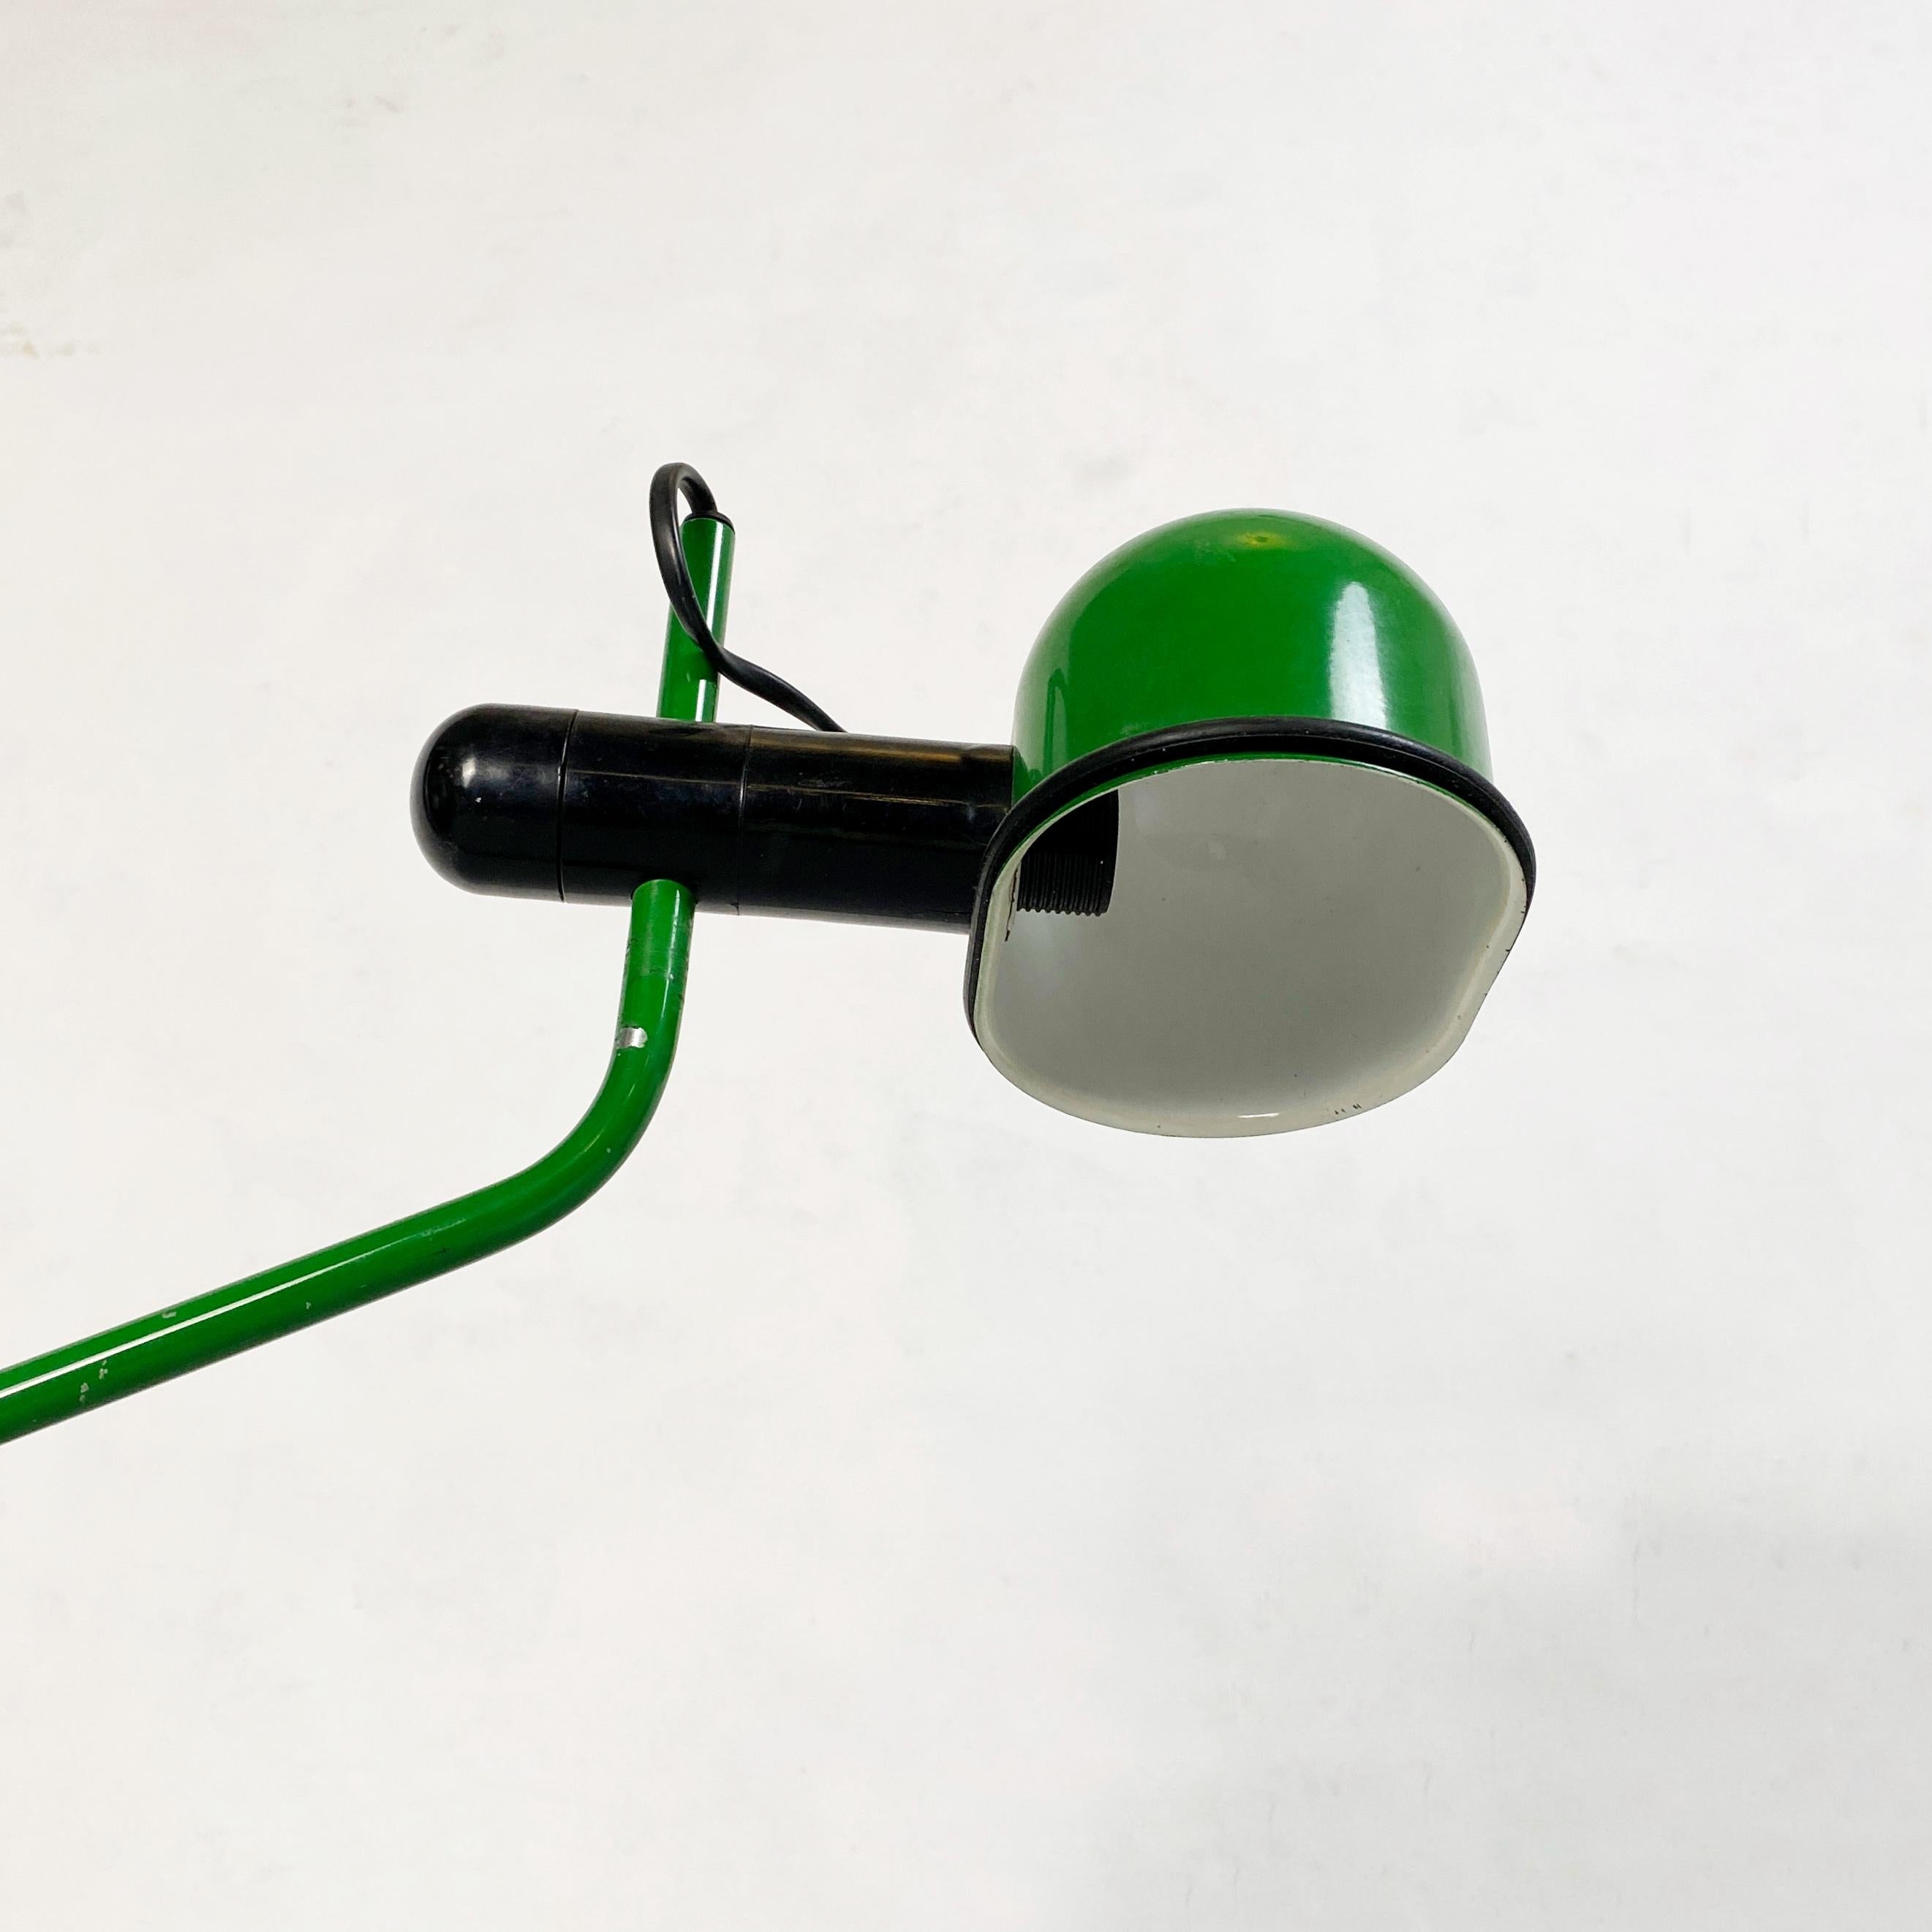 Late 20th Century Italian Mid-Century Modern Green Metal Clamp-On Table Lamp, 1980s For Sale